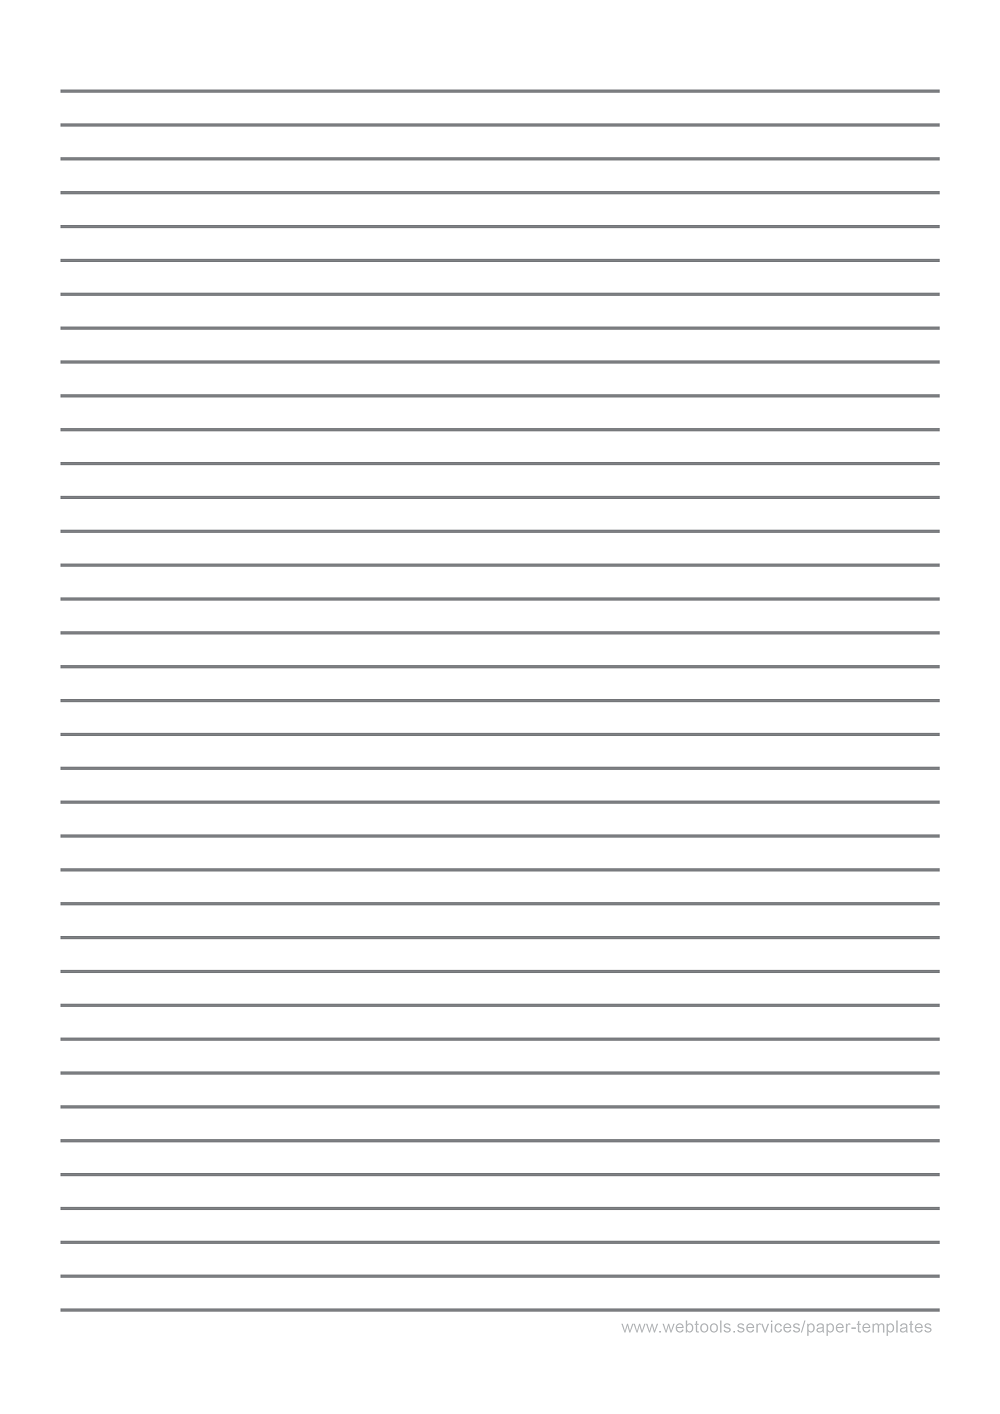 black line writing paper template with 7_1mm line height